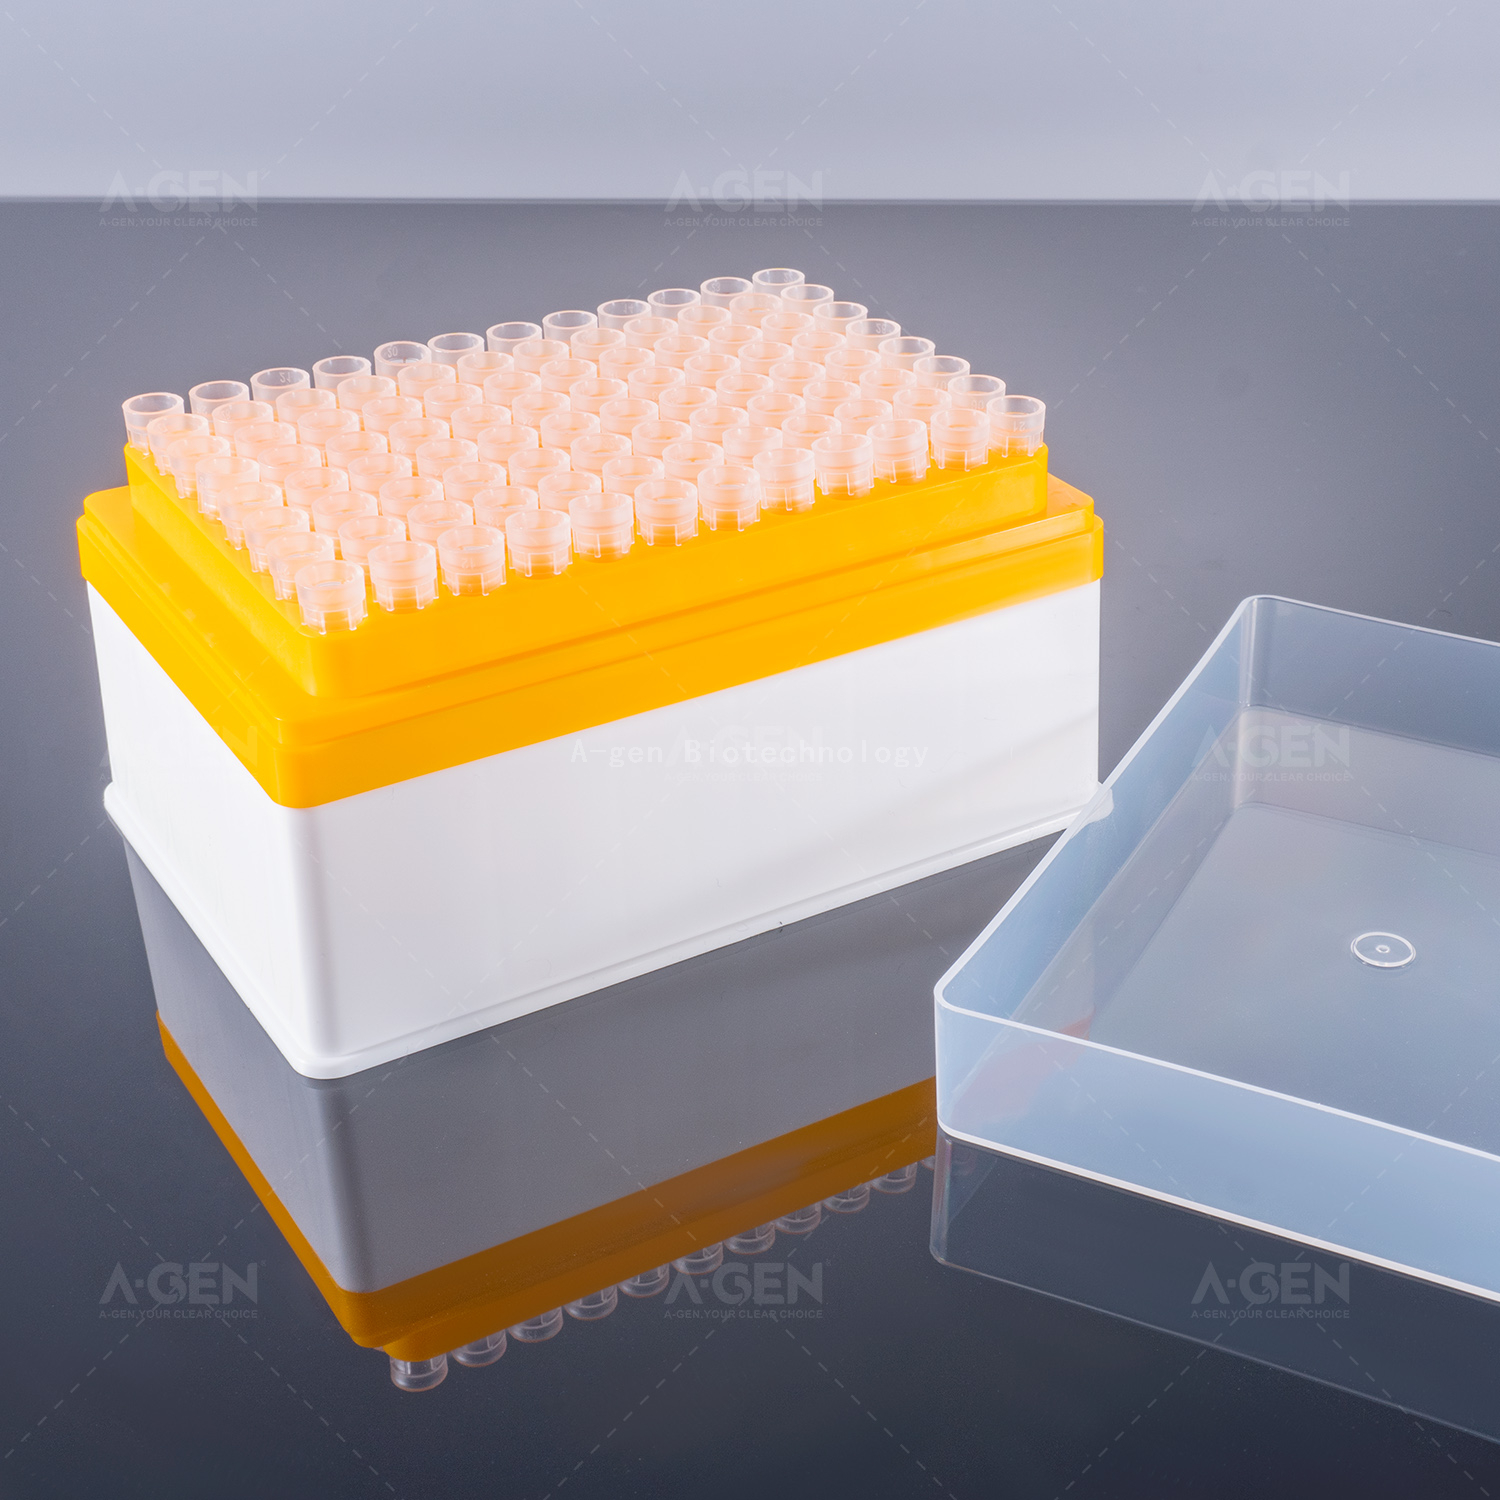 Tecan LiHa 20μL Transparent PP Pipette Tip (SBS Racked,sterilized) for Liquid Transfer With Filter TTF-20-RSL Low Residual